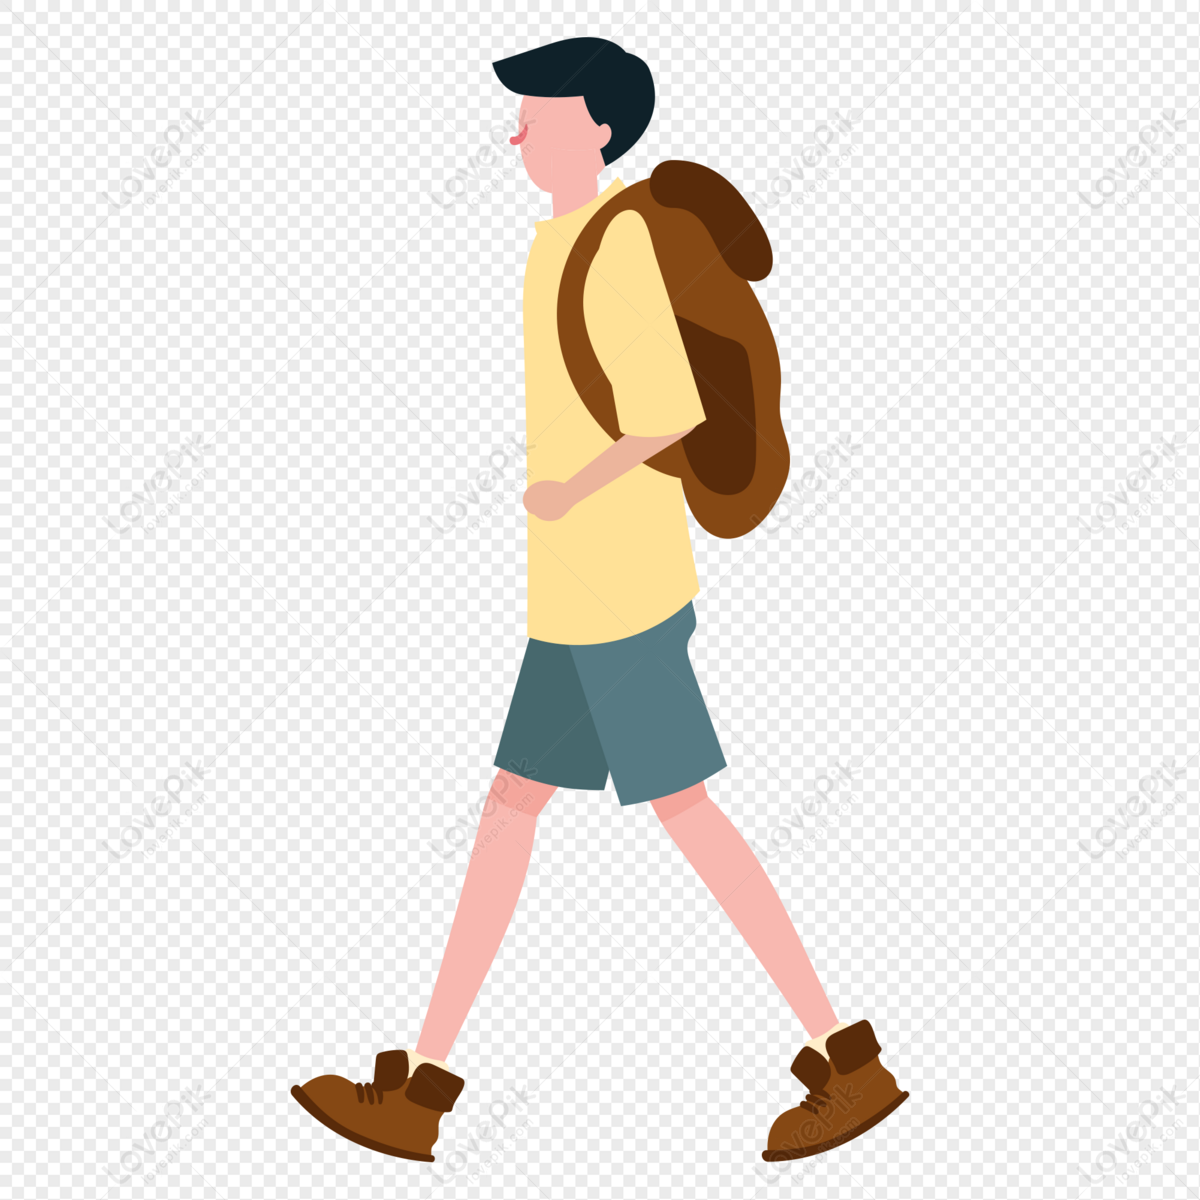 Travel By Walking, Backpack Man, Man Walking, Light Man Free PNG And  Clipart Image For Free Download - Lovepik